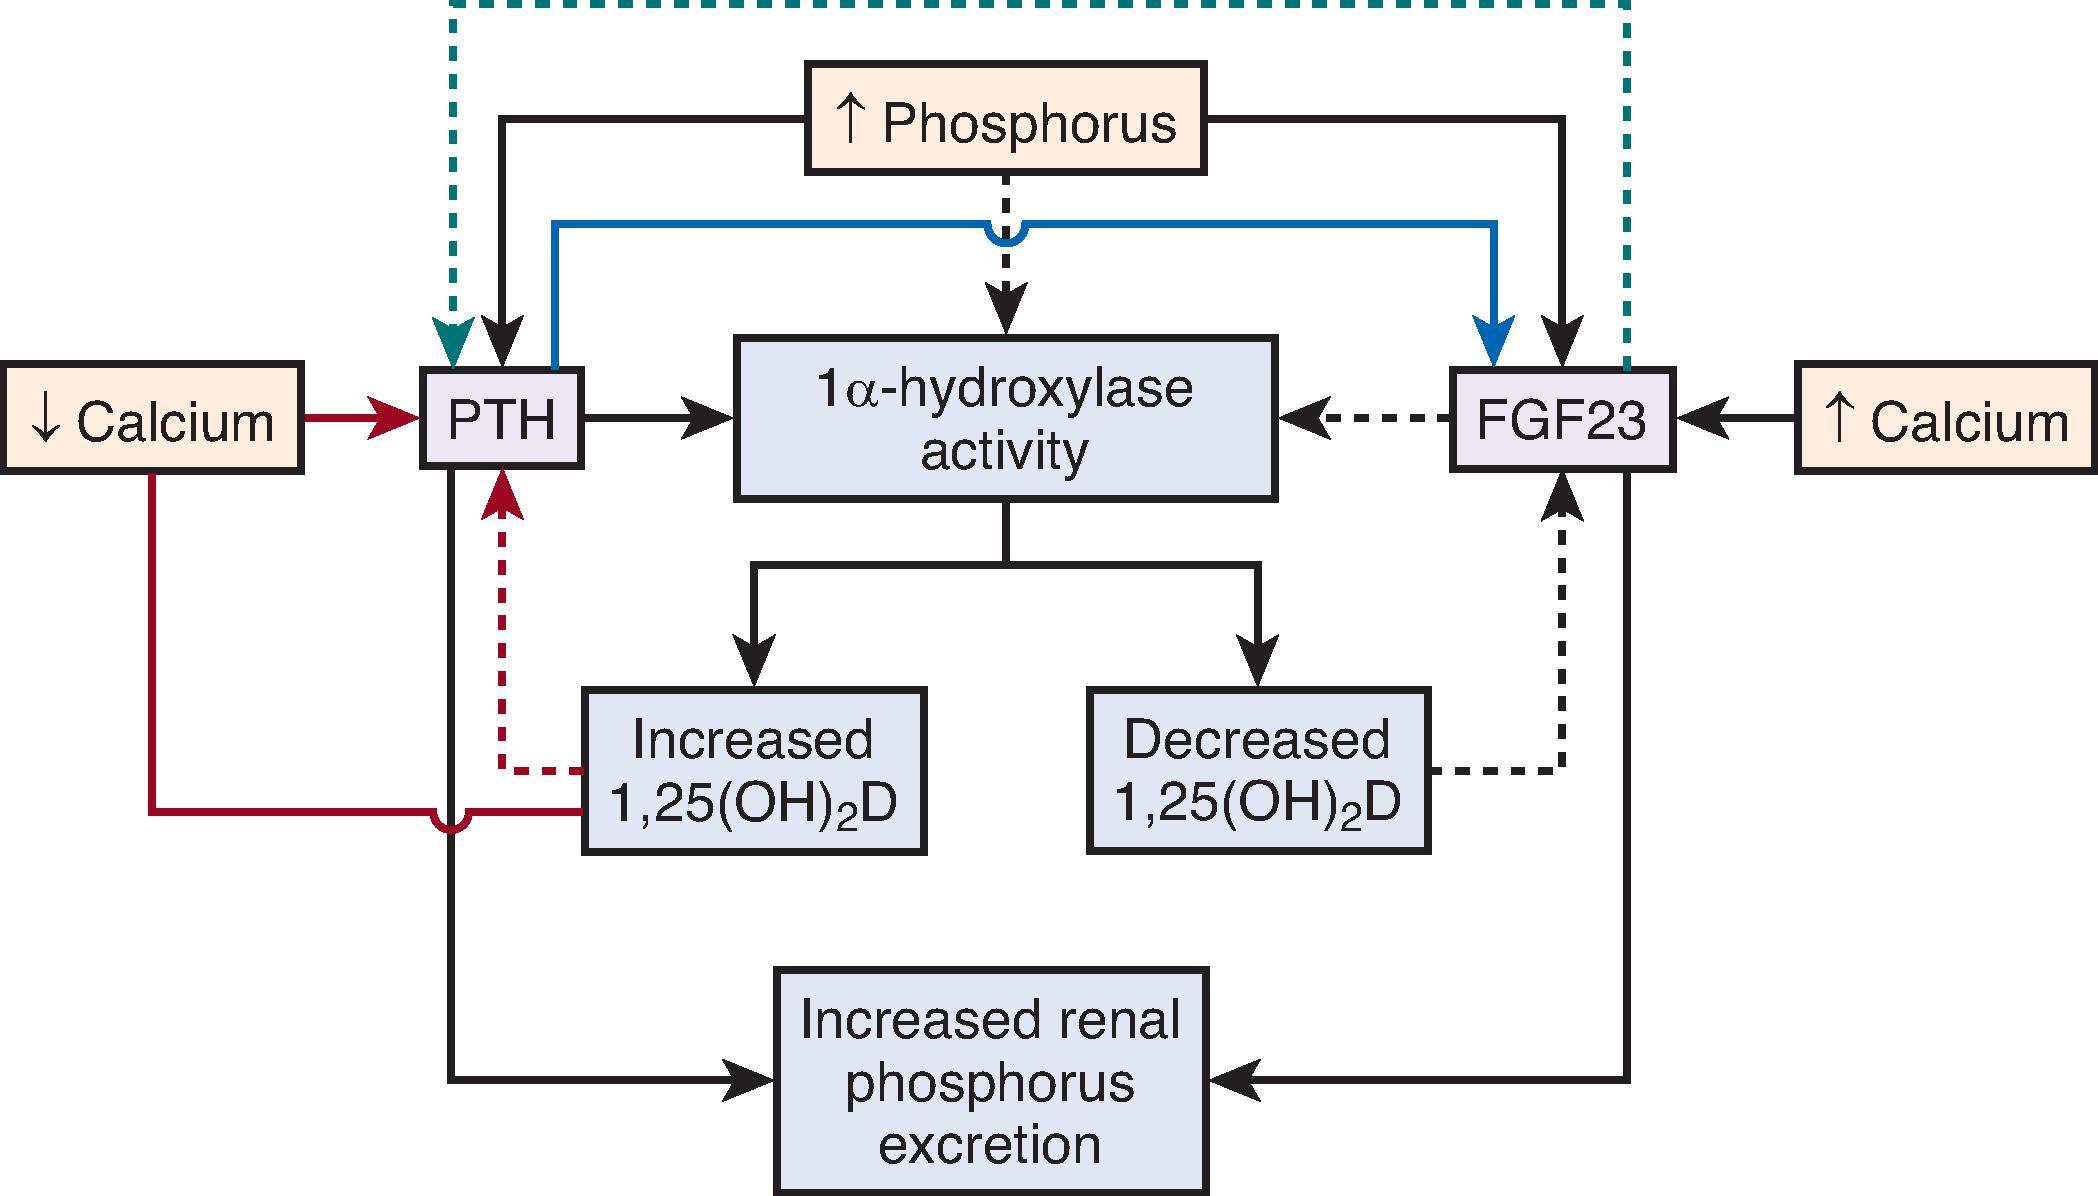 Fig. 11.2, Hormonal control of phosphorus. In the setting of increased phosphorus intake or hyperphosphatemia, both parathyroid hormone (PTH) and fibroblast growth factor 23 (FGF23) are stimulated and induce kidney phosphorus excretion. However, PTH and FGF23 have opposing effects on the CYP27B1 (1α-hydroxylase) to increase and decrease 1,25(OH) 2 D (calcitriol) production, respectively. The increased calcitriol then feeds back to inhibit PTH, and the decreased calcitriol then feeds back to inhibit FGF23 (as calcitriol normally stimulates FGF23). Hypocalcemia also stimulates PTH, and recent data suggest hypercalcemia stimulates FGF23. The solid lines represent an increase in levels; the dotted lines represent a decrease or inhibition of levels. (Adapted from Moe SM, Sprague SM. Chronic kidney disease–mineral bone disorder. In: Taal MW, Chertow GM, Marsden PA, Skorecki K, Yu ASL, Brenner BM, eds. Brenner and Rector’s the Kidney . 9th ed. Philadelphia: Elsevier Saunders; 2012:2023.)